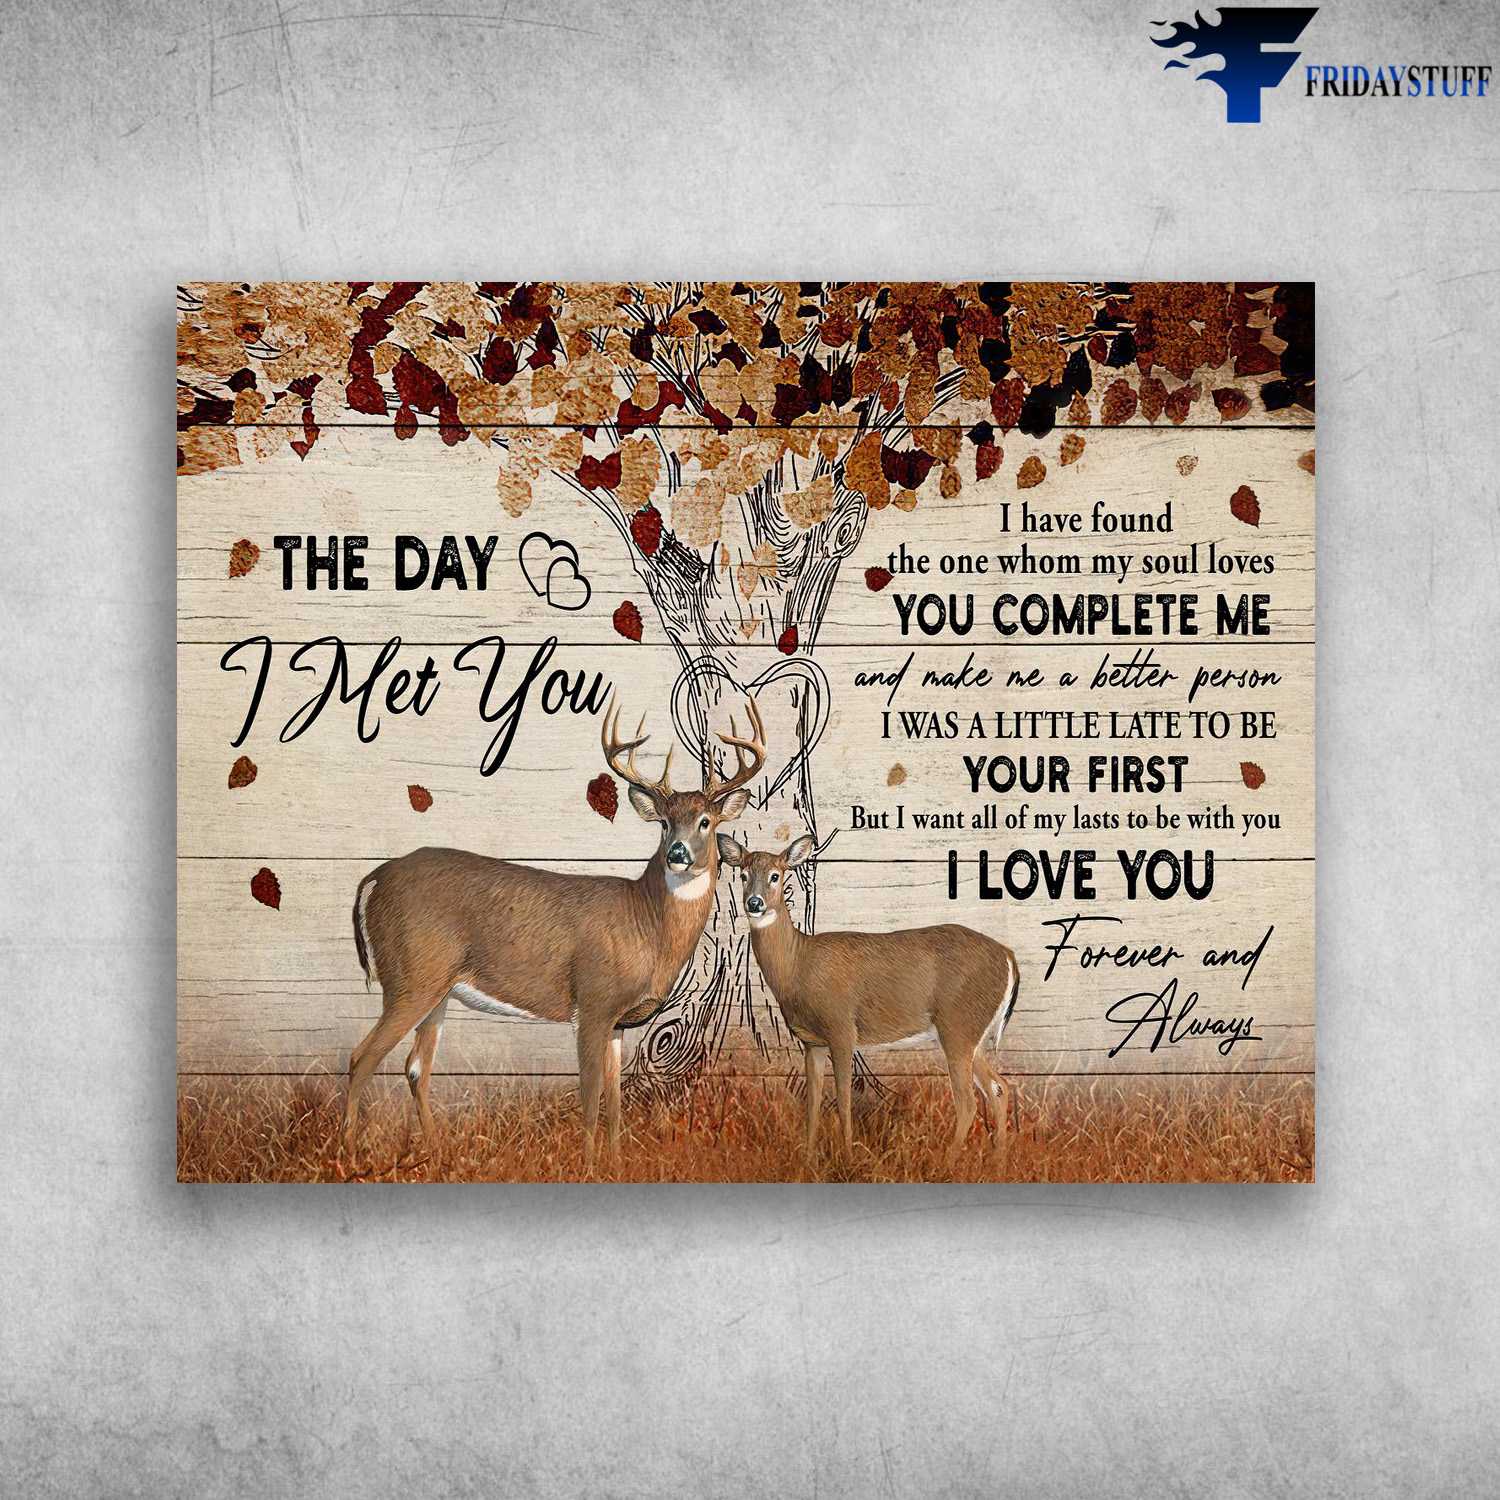 Deer Couple, Love Poster, The Day I Met You, I Have Found The One, Whom My Soul Loves, You Complete And Make Me A Better Person, I Was A Little Late To Be Your First, But I Want All Of My Last To Be With You